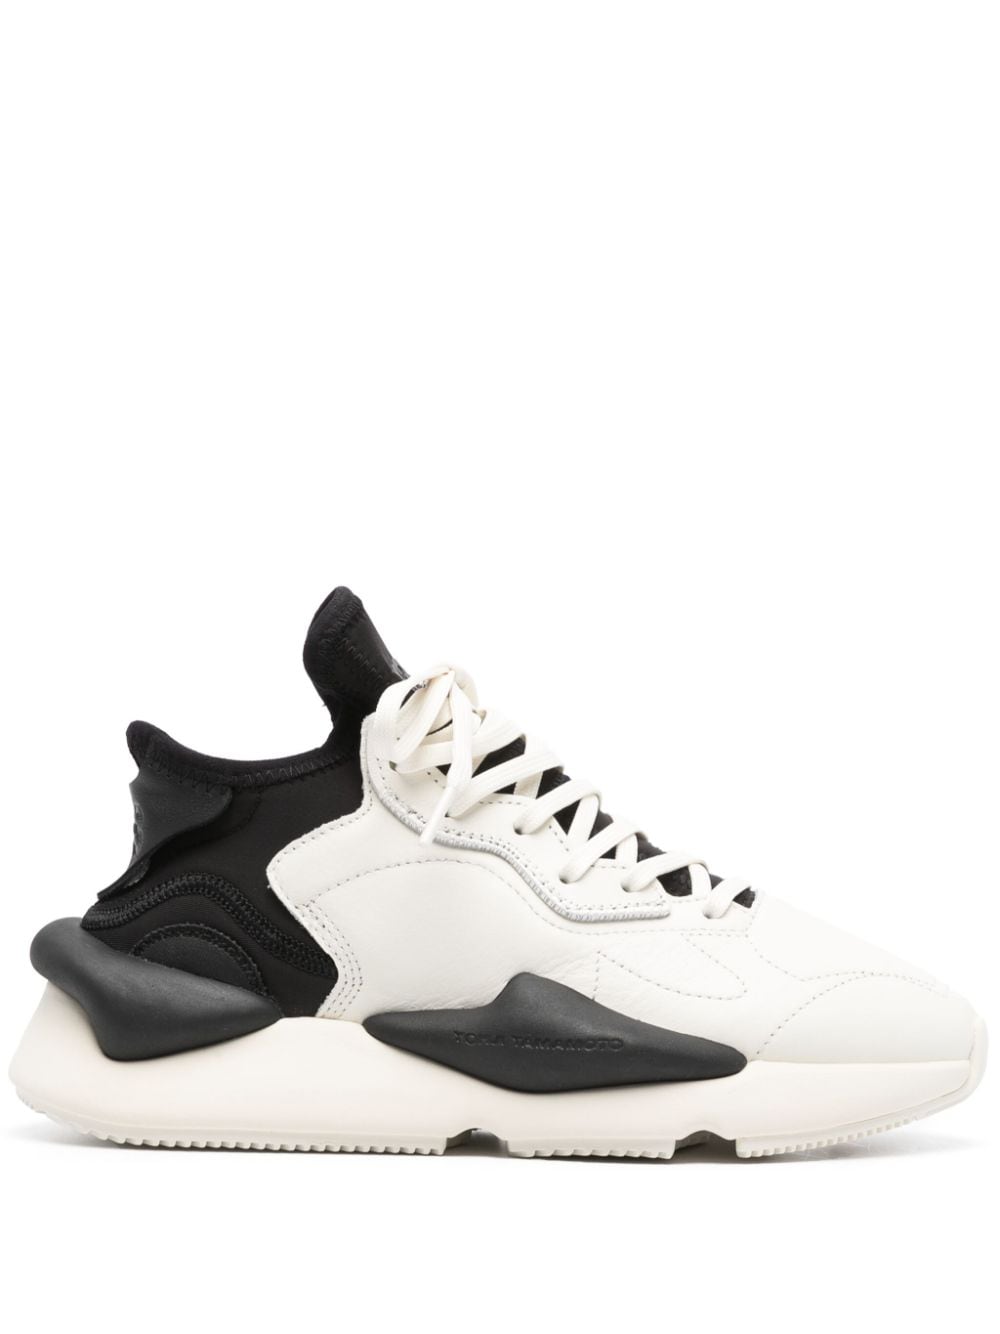 Image 1 of Y-3 Kaiwa panelled leather sneakers